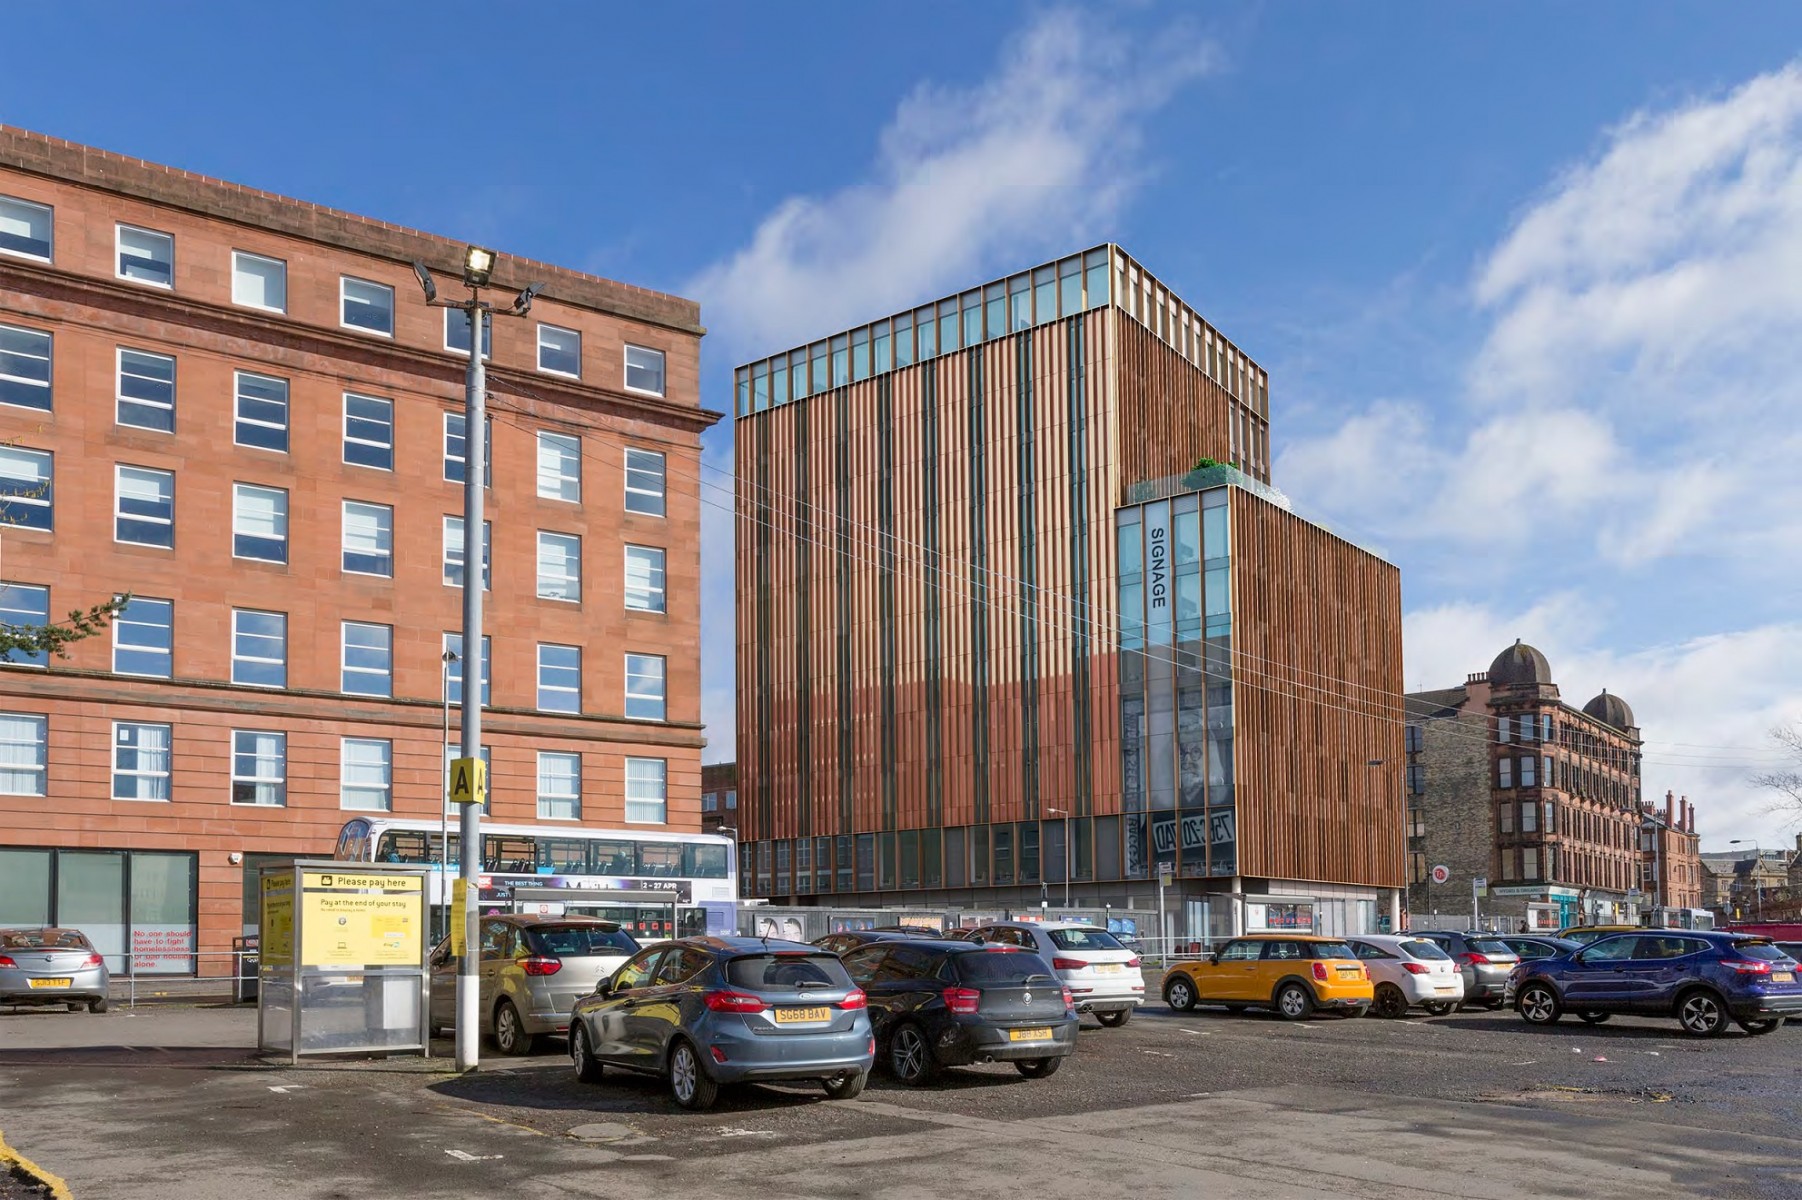 Glasgow approves plans for 12-storey city centre hotel